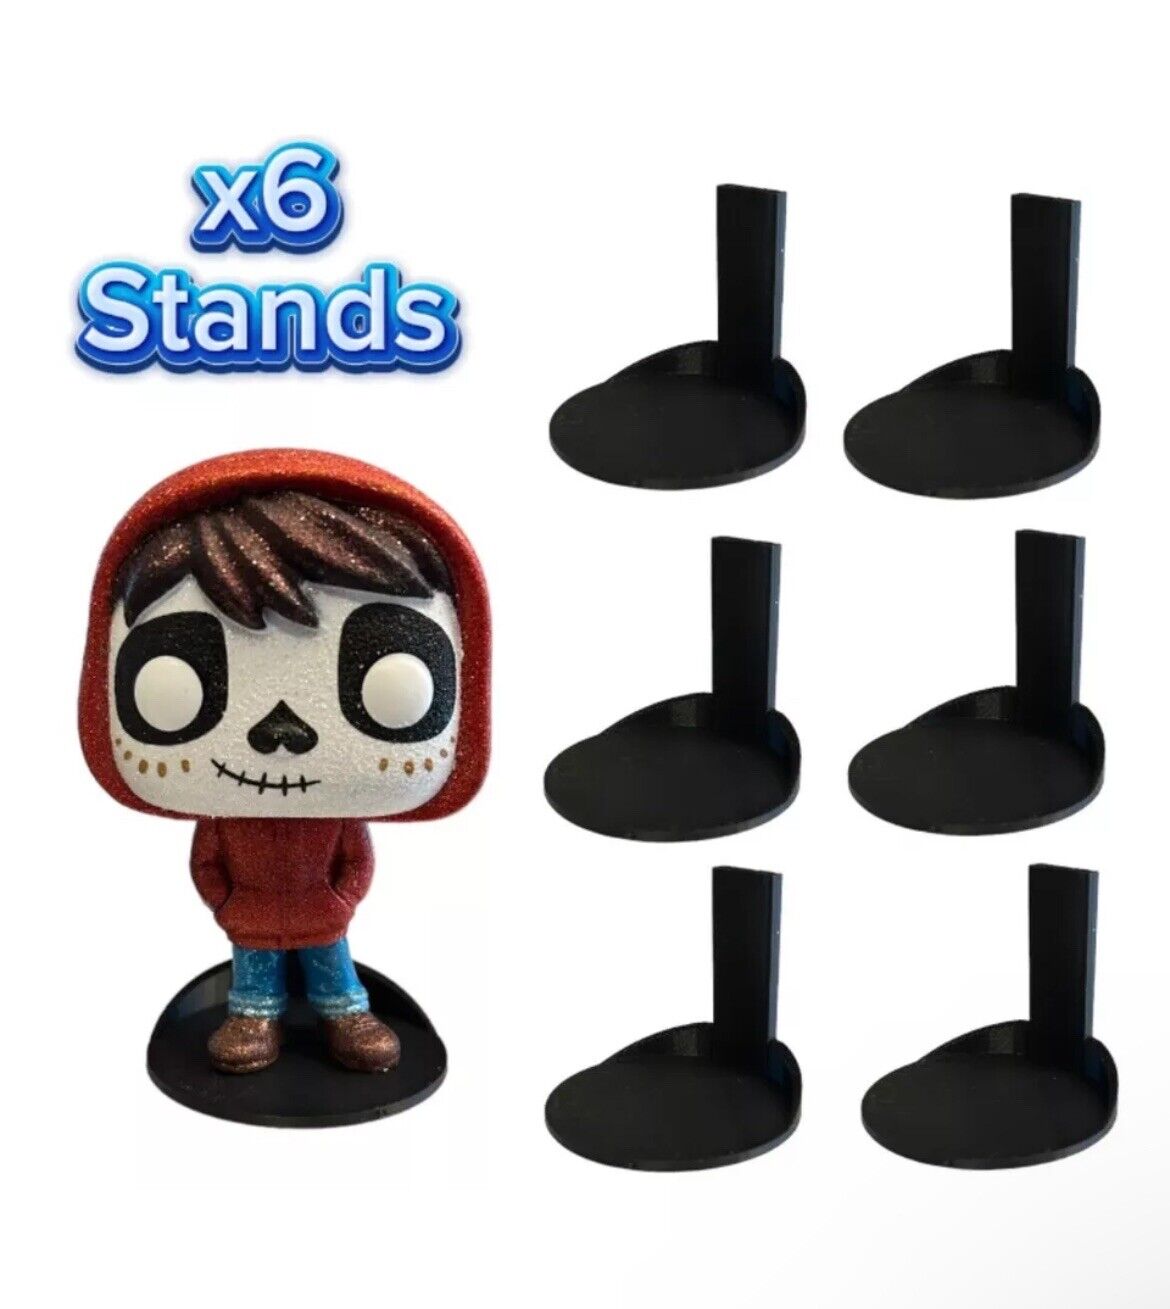 Set Of 6 Wall Display Shelves For Collectibles And Funko Pops - No Nails Needed